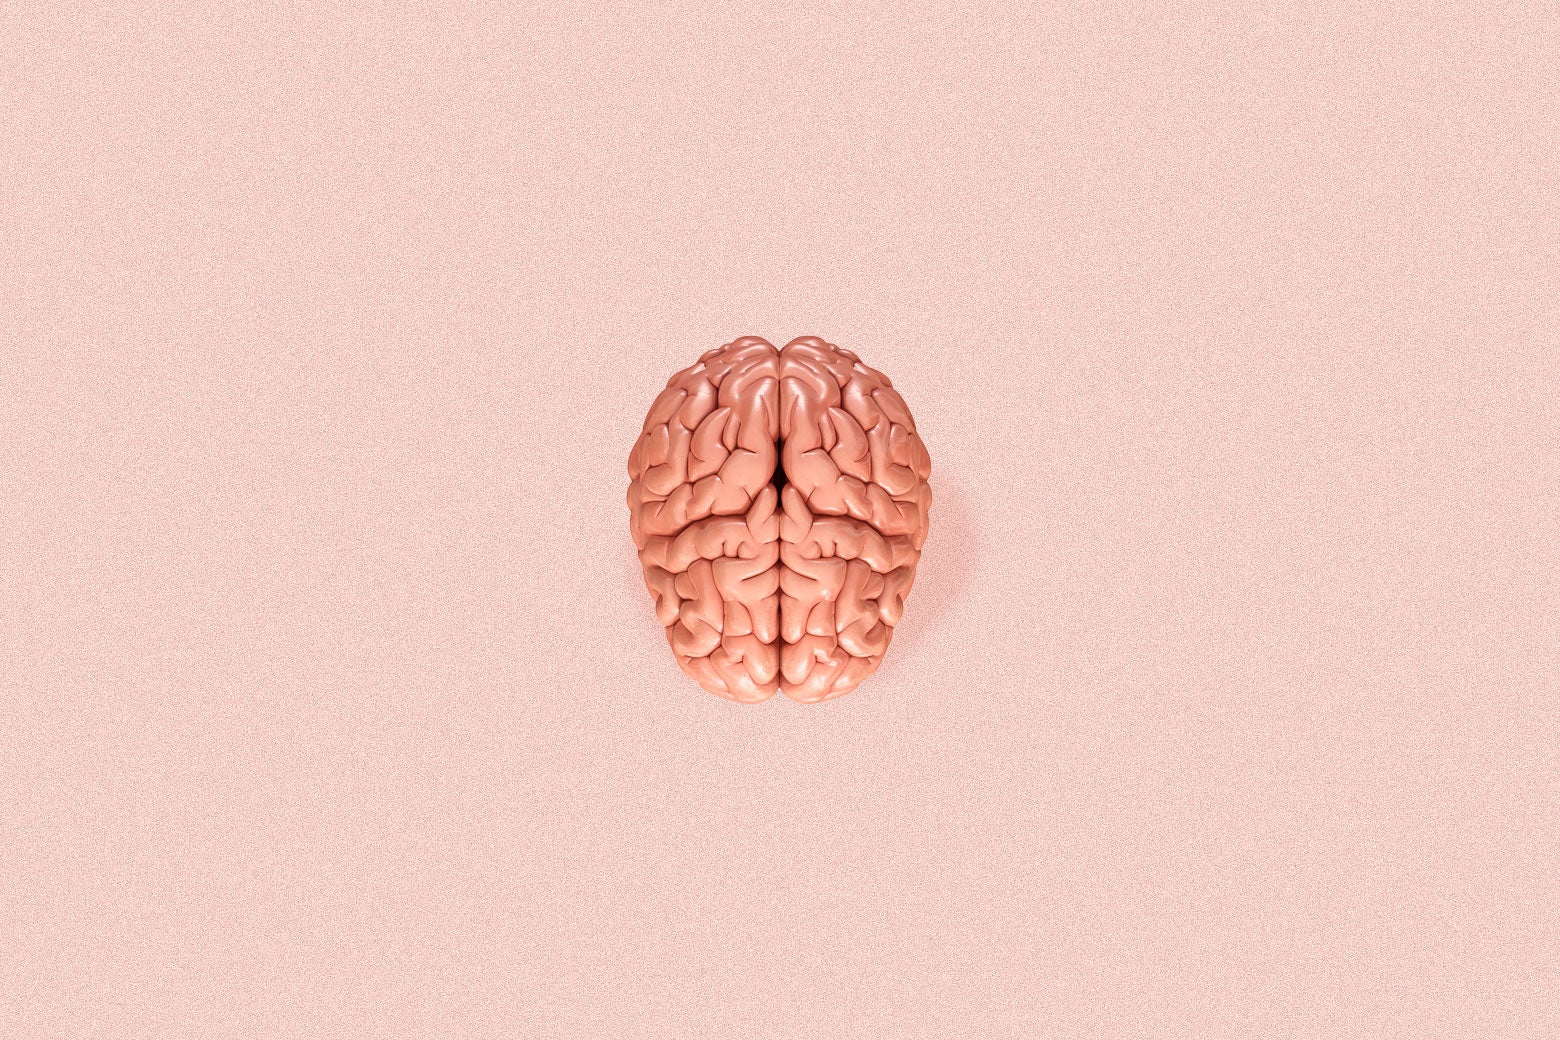 A realistic photo of a brain against a pink background.